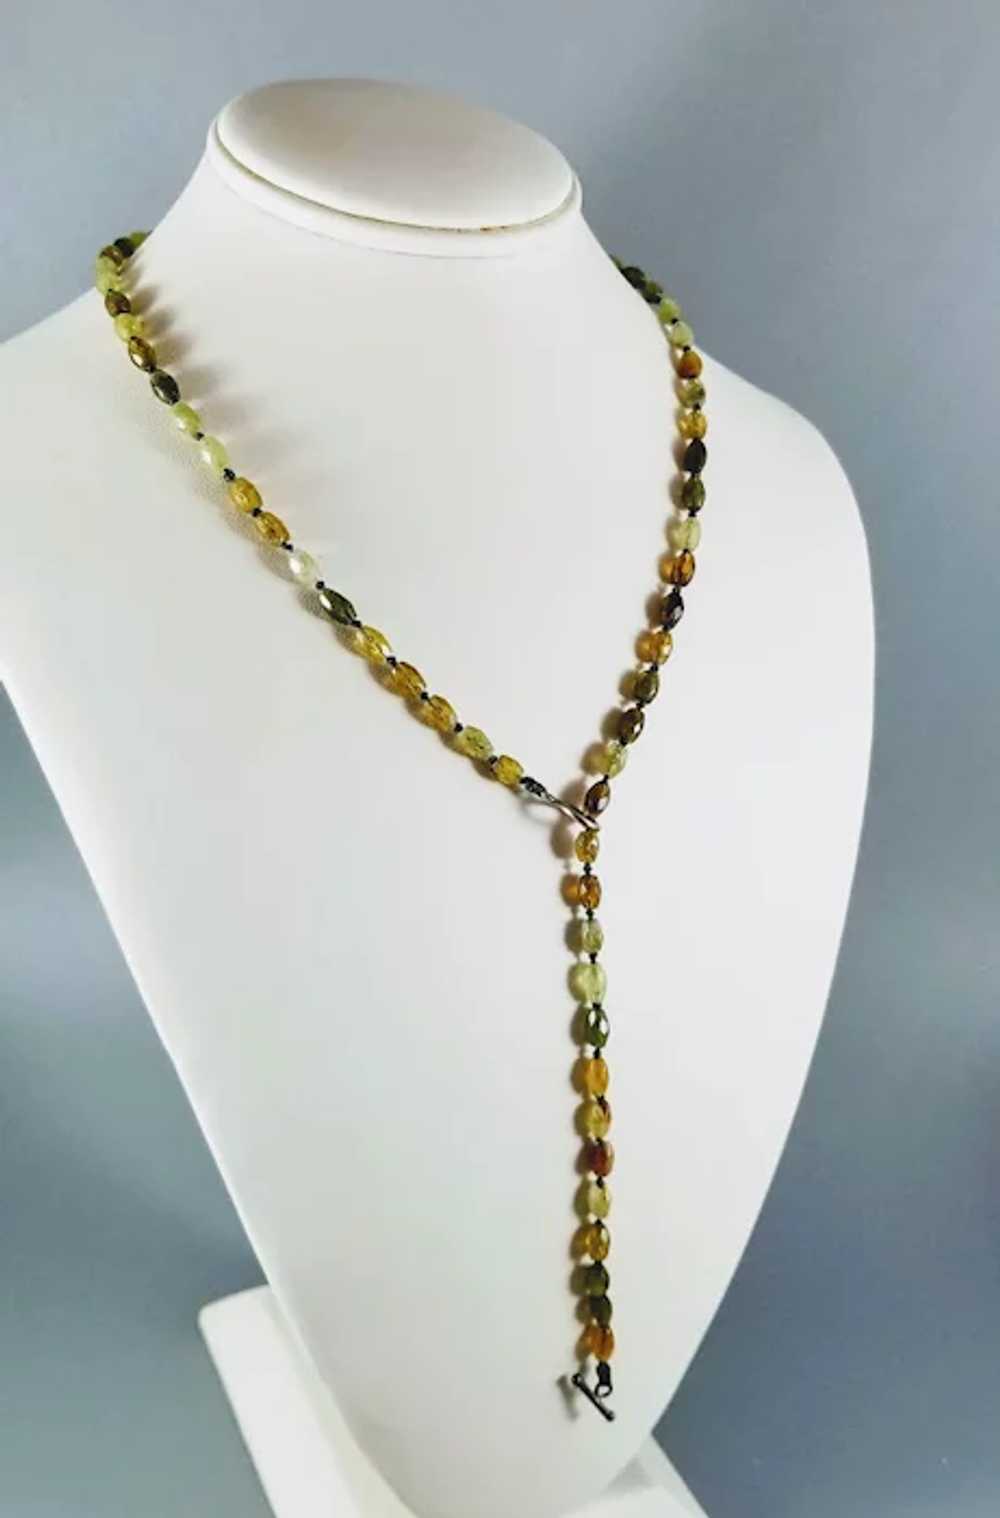 Faceted Peridot Beads Necklace - image 2